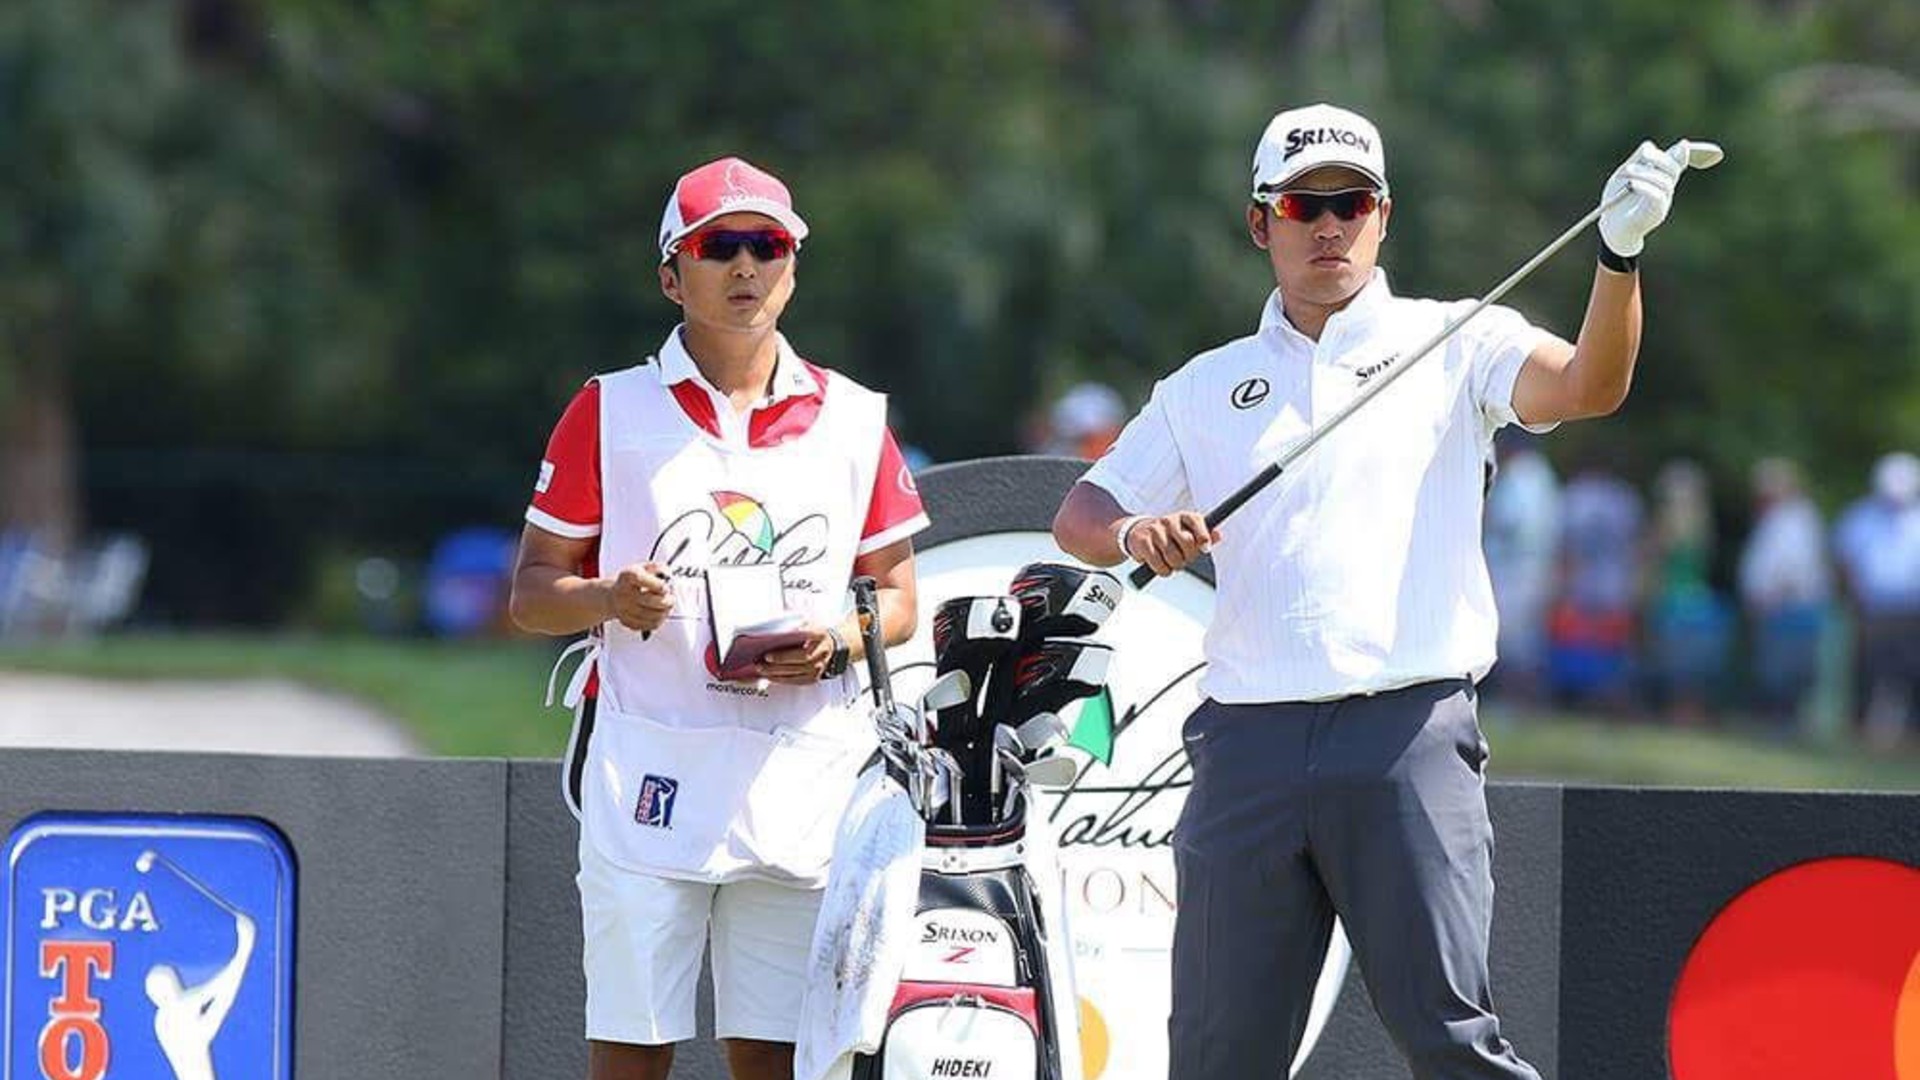 Daisuke Shindo caddied for Hideki Matsuyama for six seasons, and has revealed his delight after his 'brother in arms' won the Masters.